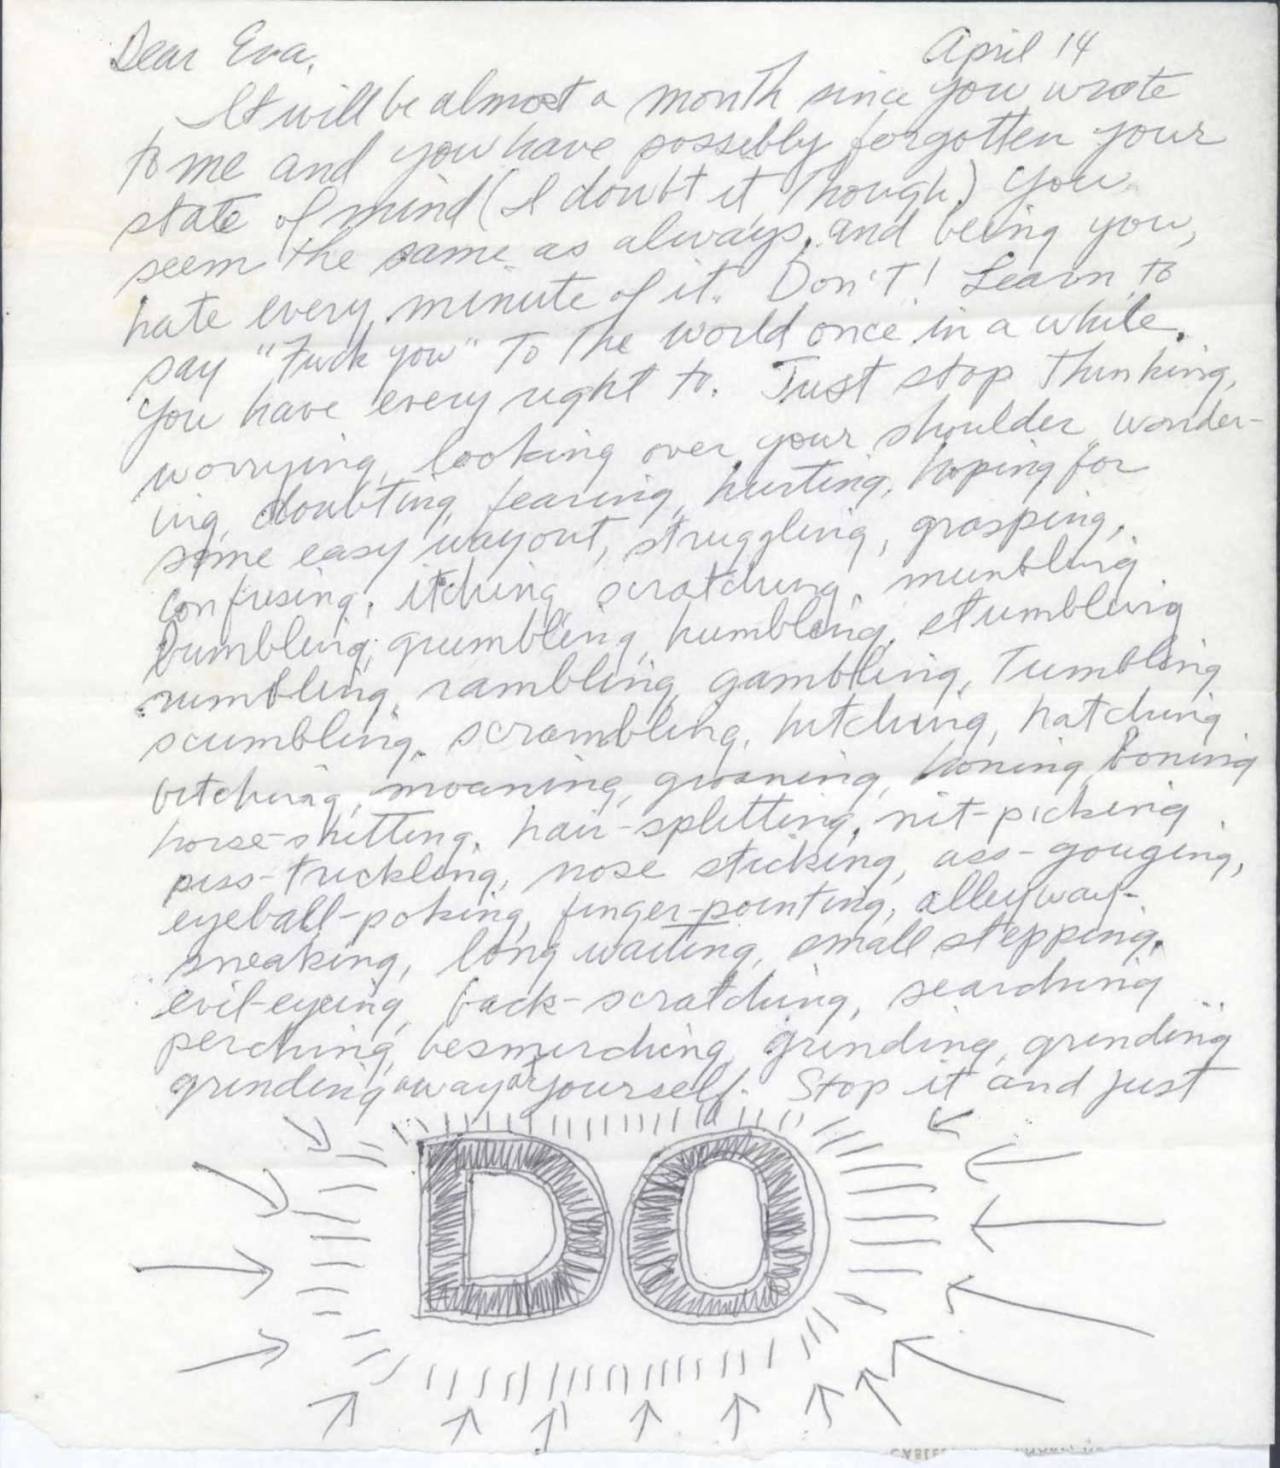 Sol LeWitt’s 1965 letter of encouragement to Eva Hesse, which directly influenced and inspired some of her most confident and groundbreaking work. The letter has taken on a life of its own in some circles, continuing to spread the “maker” mentality...